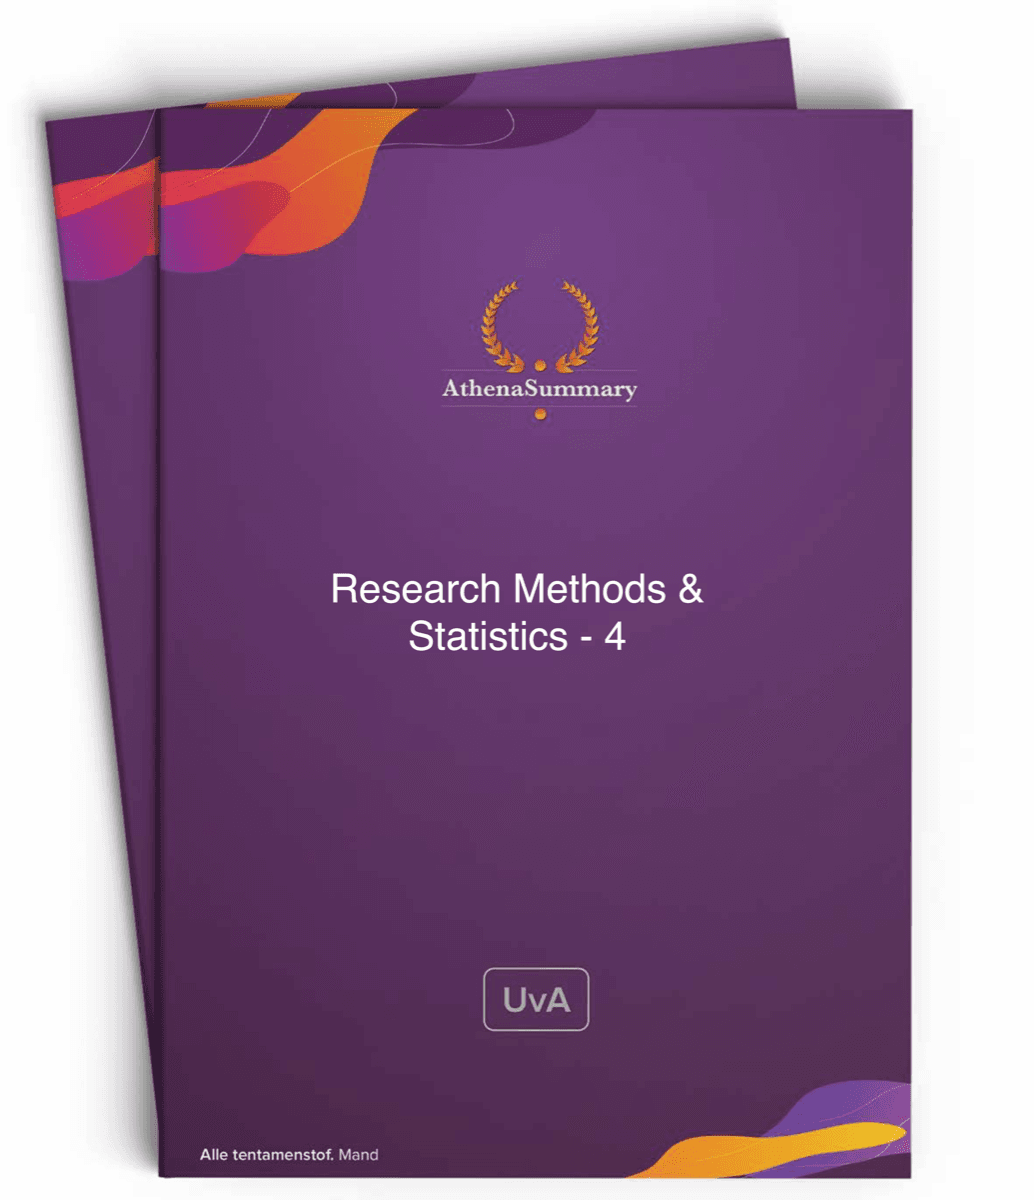 Literature Summary: Research Methods and Statistics - 4